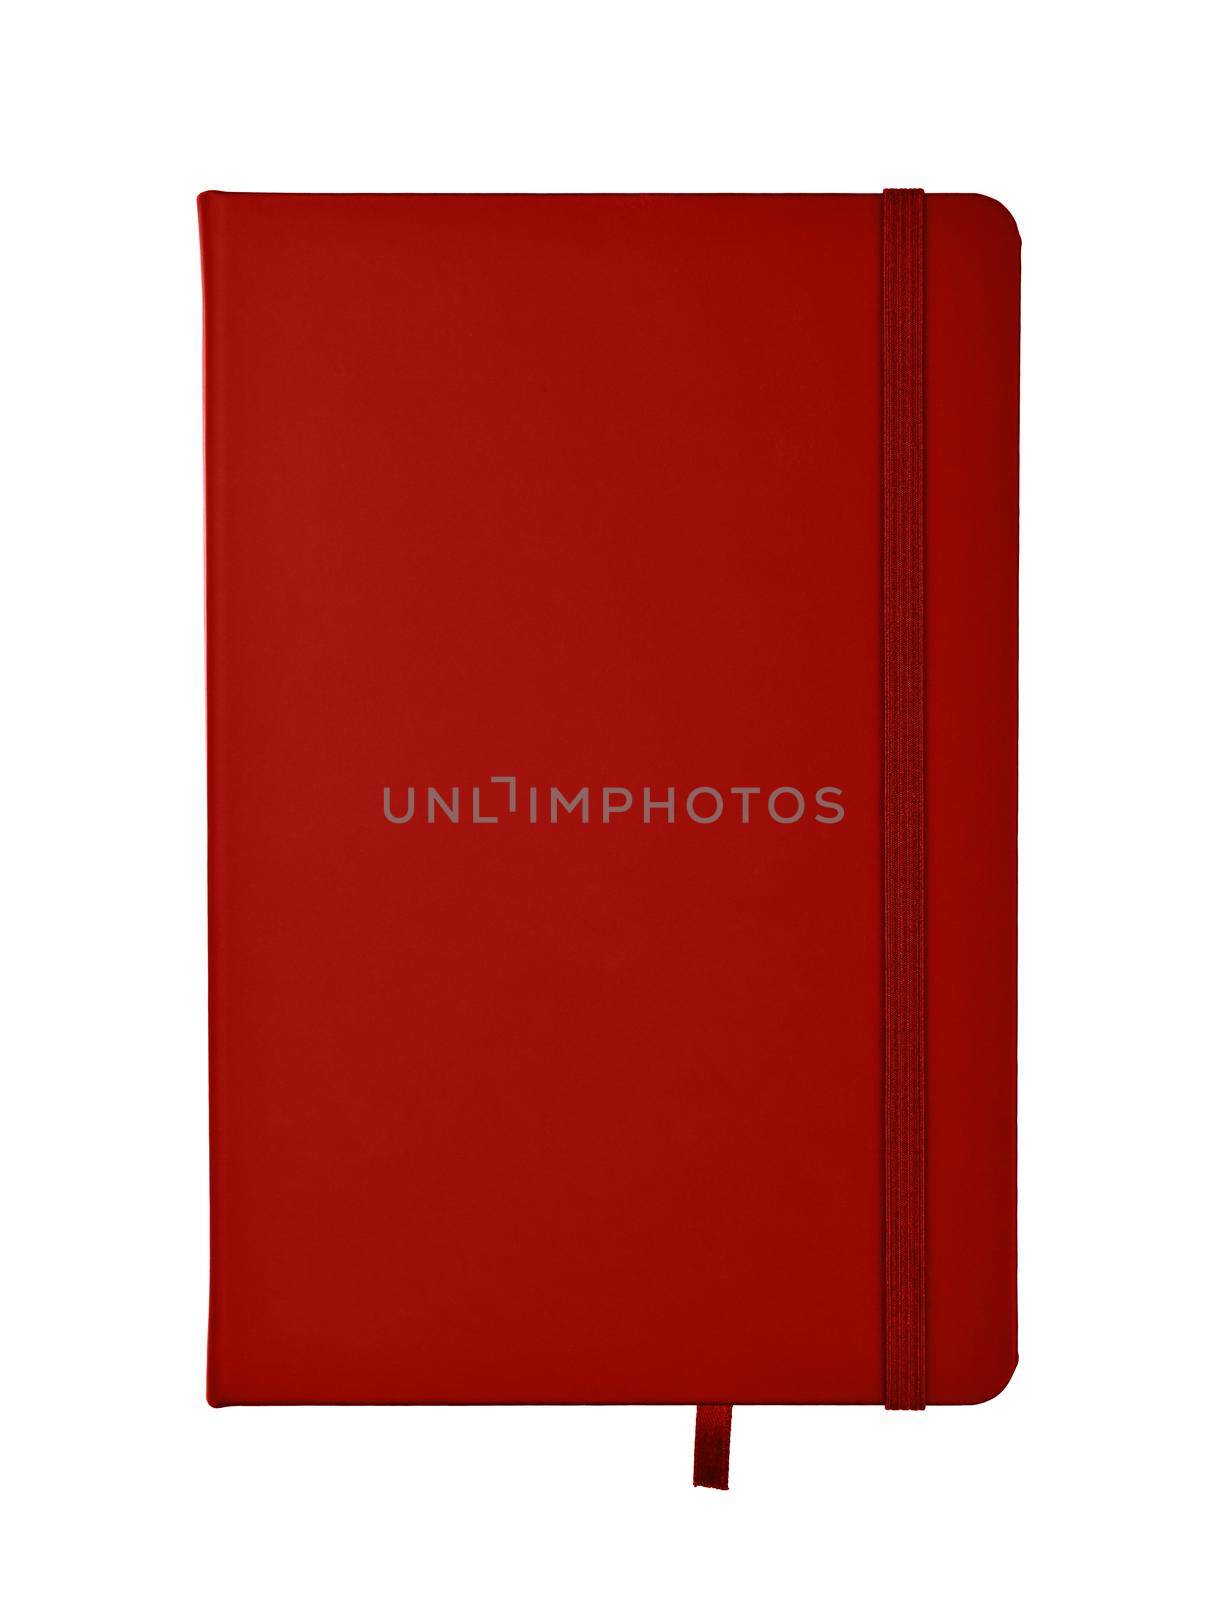 Closed maroon red faux leather cover notebook isolated on white background, flat lay, directly above